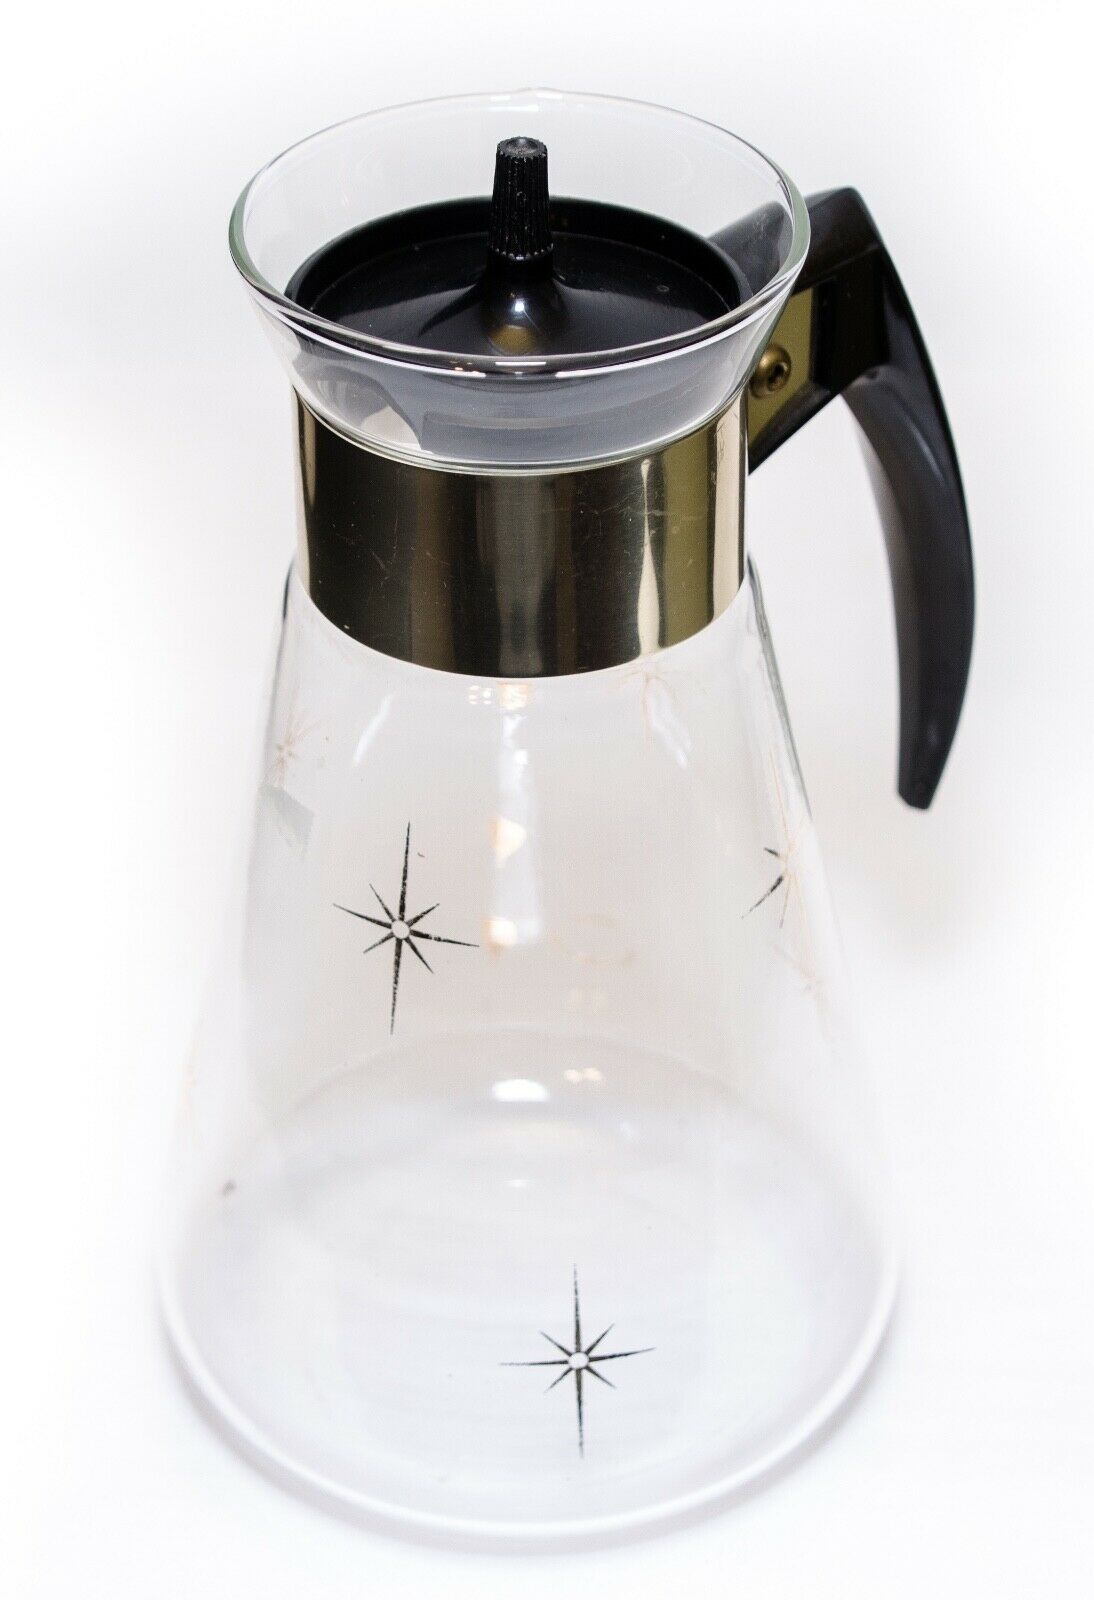 Primary image for Corning Coffee Pot Carafe Atomic Star Burst 6 Cup Heatproof Glass 1960’s Vintage